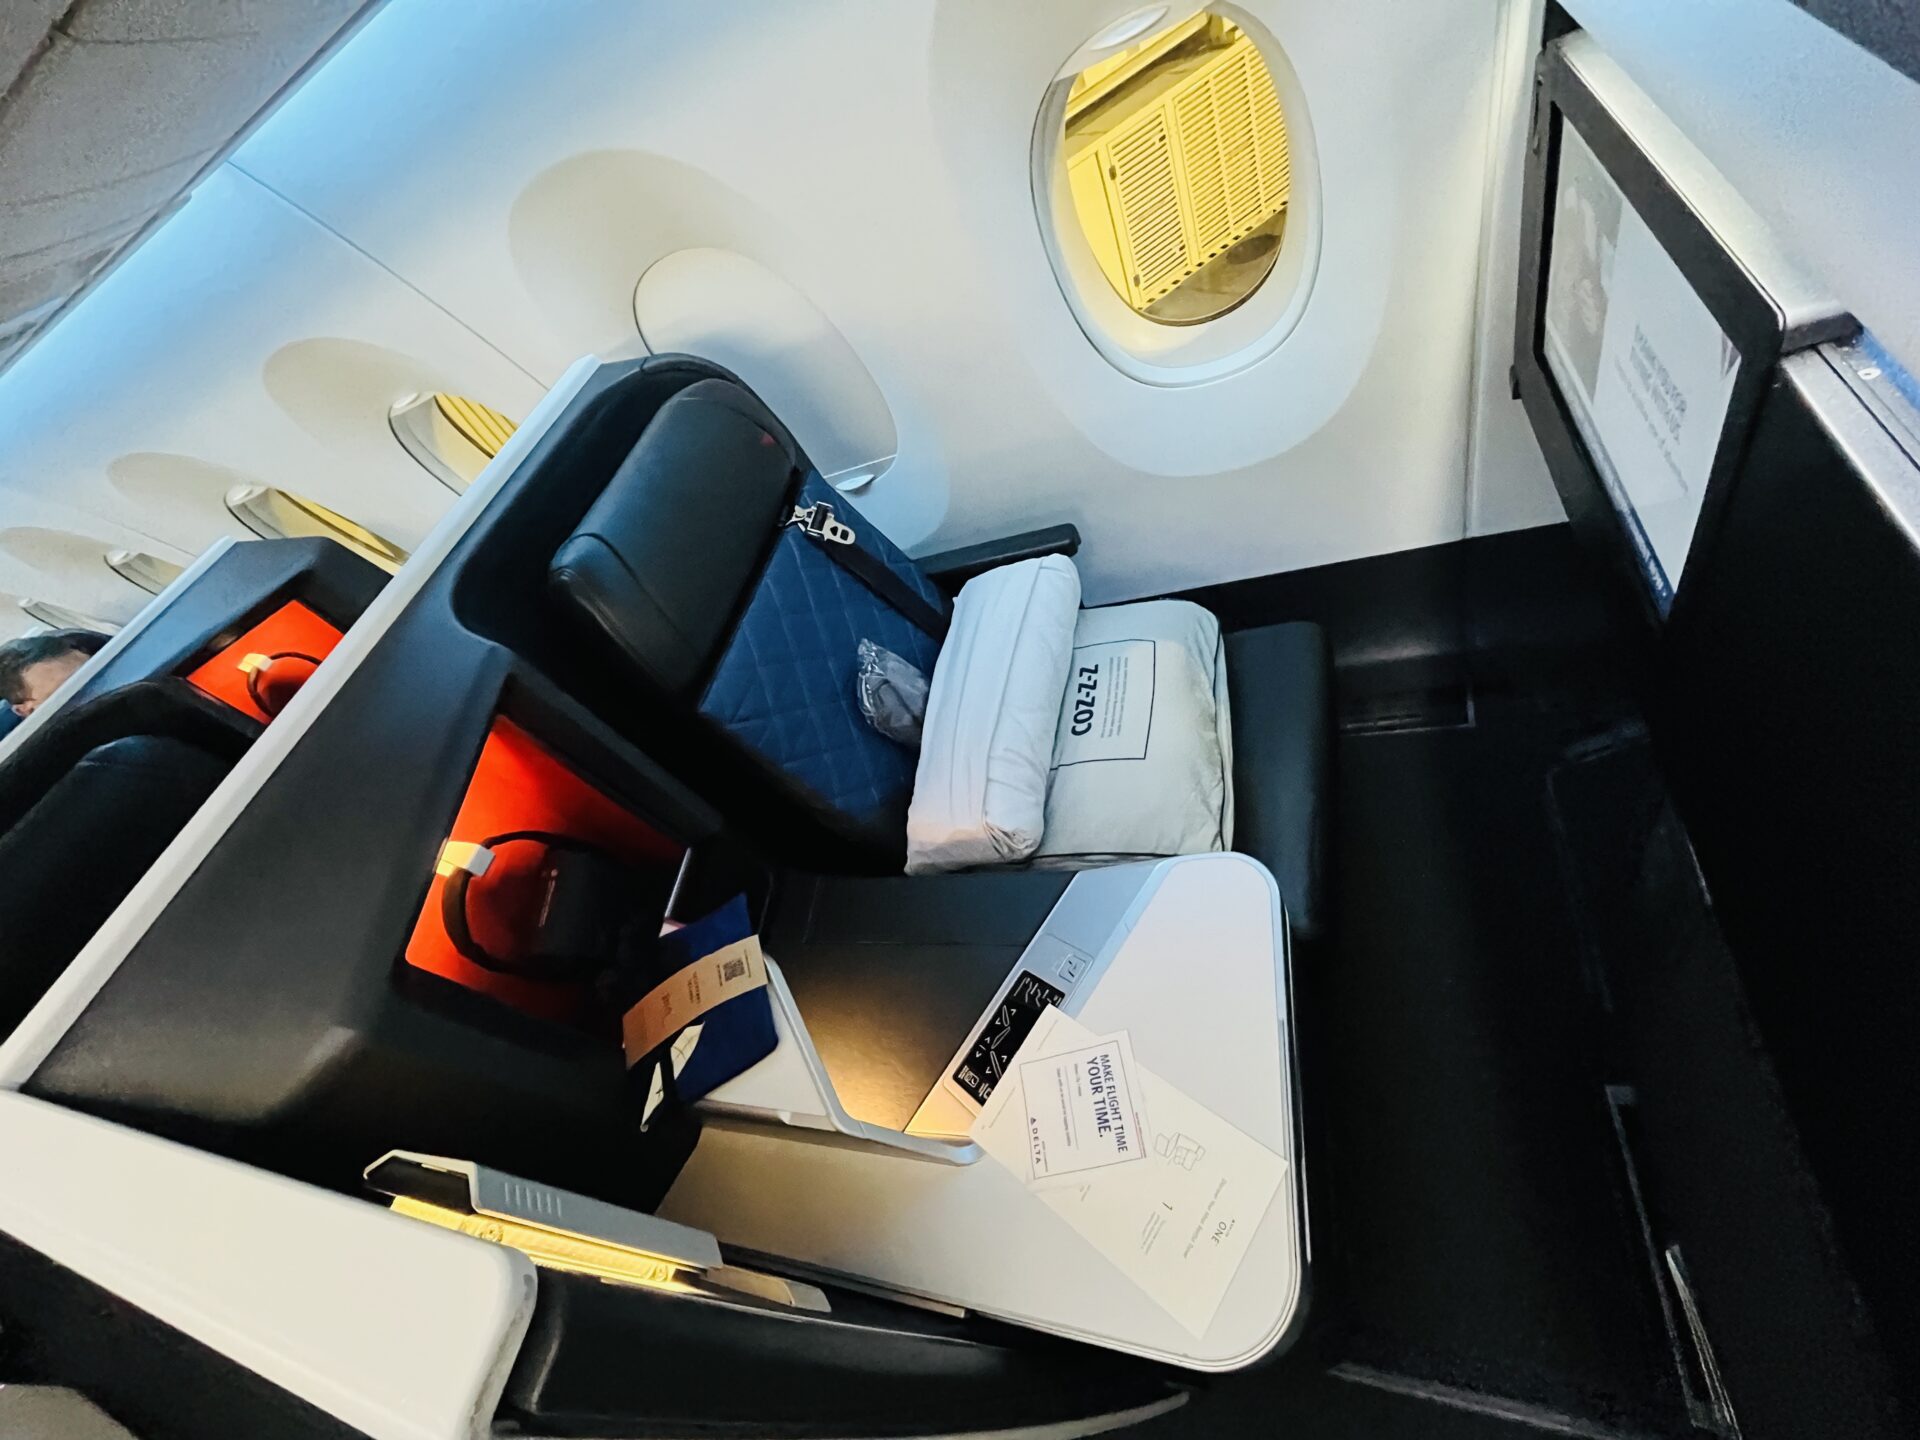 Review: Delta One A350-900 DL41 Los Angeles (LAX) to Sydney (SYD)